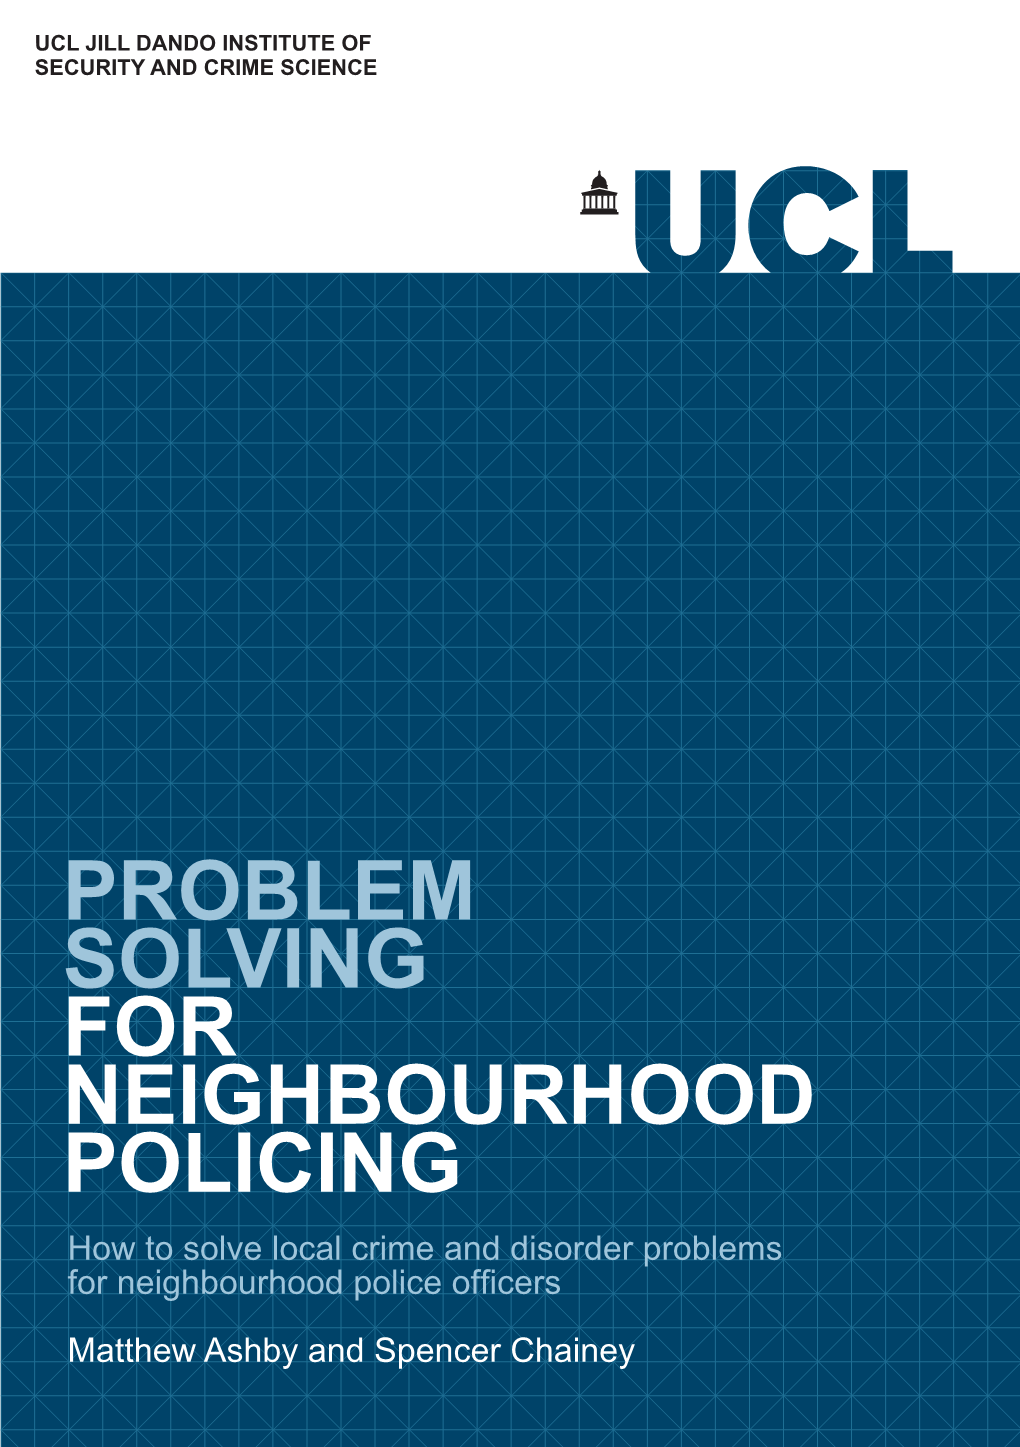 PROBLEM SOLVING for NEIGHBOURHOOD POLICING How to Solve Local Crime and Disorder Problems for Neighbourhood Police Officers Matthew Ashby and Spencer Chainey Contents